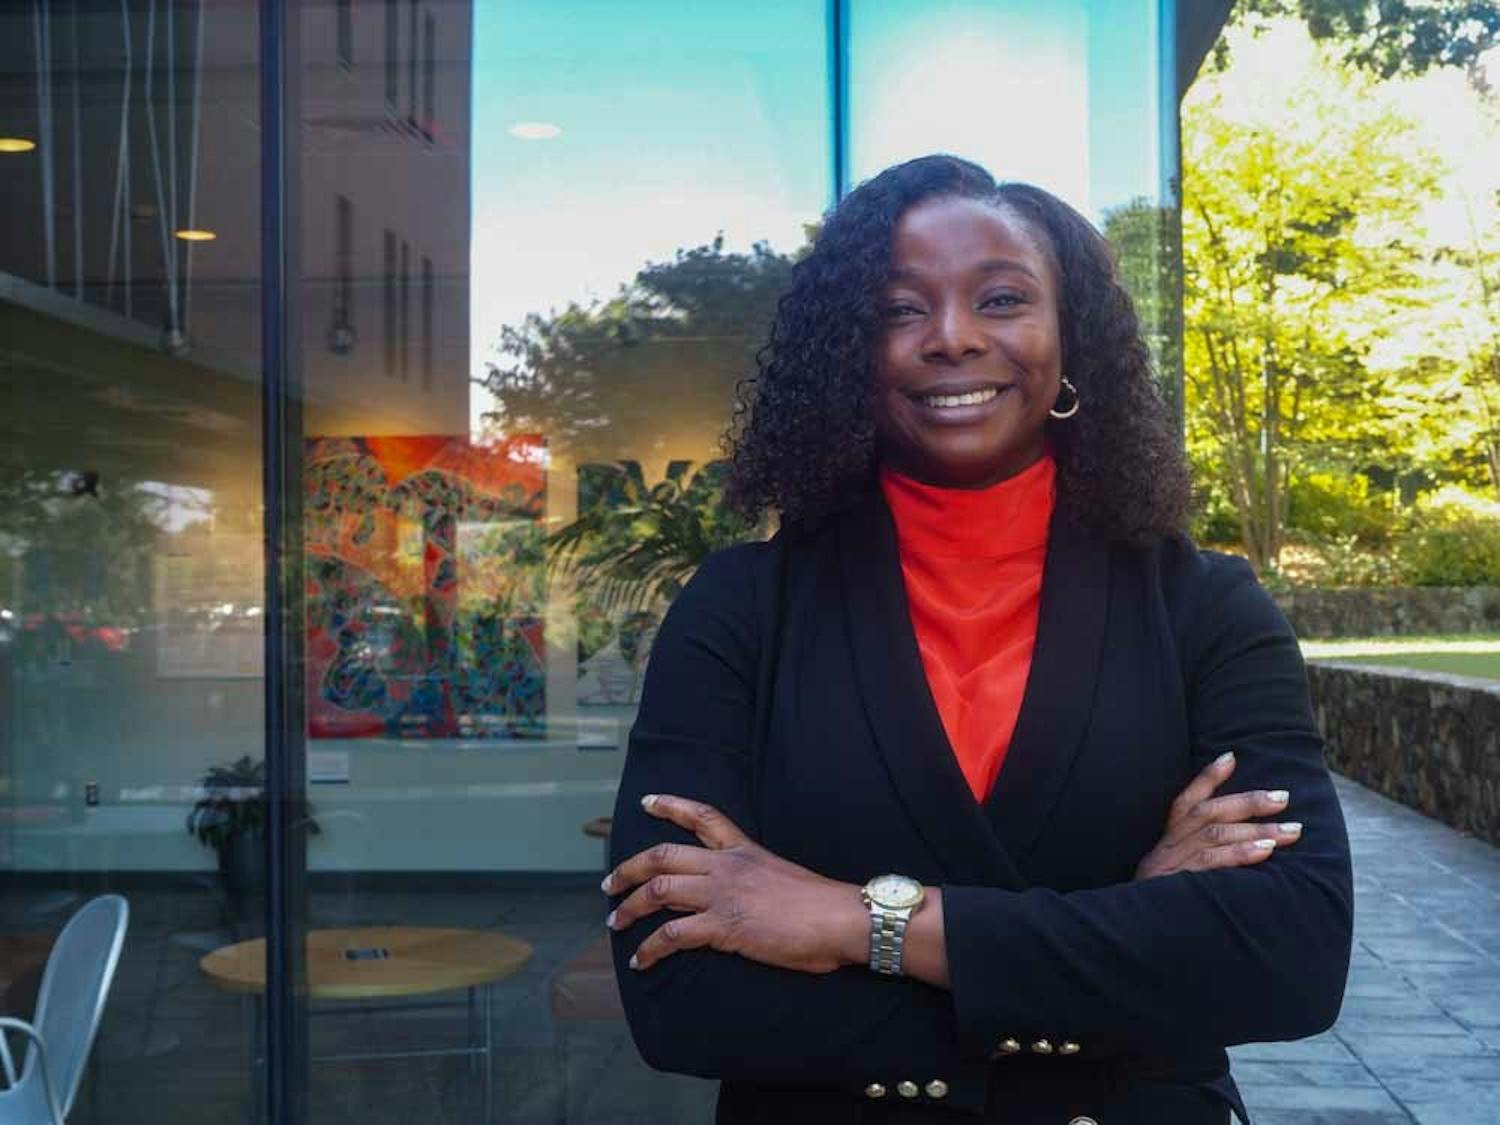 Associate Director of The African Studies Center, Ada Umenwaliri, poses for a portrait in front of the FedEx Center on Sept. 28. The ASC was recently awarded a $500,000 grant from the Oak Foundation to fund their digital platform about contemporary Africa.